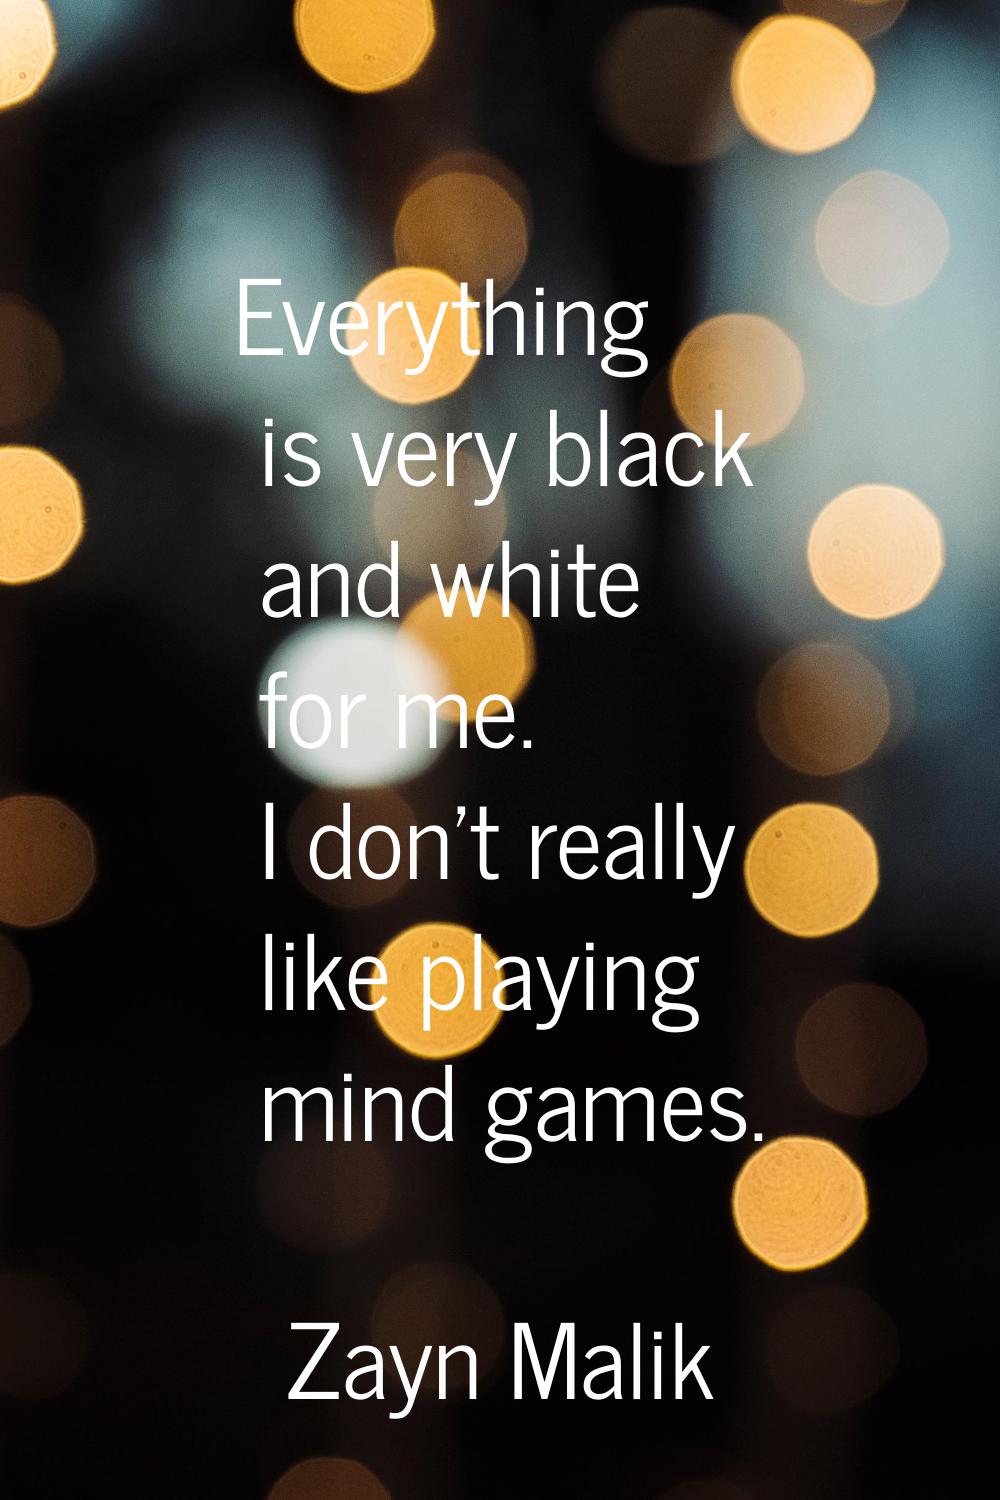 Everything is very black and white for me. I don't really like playing mind games.